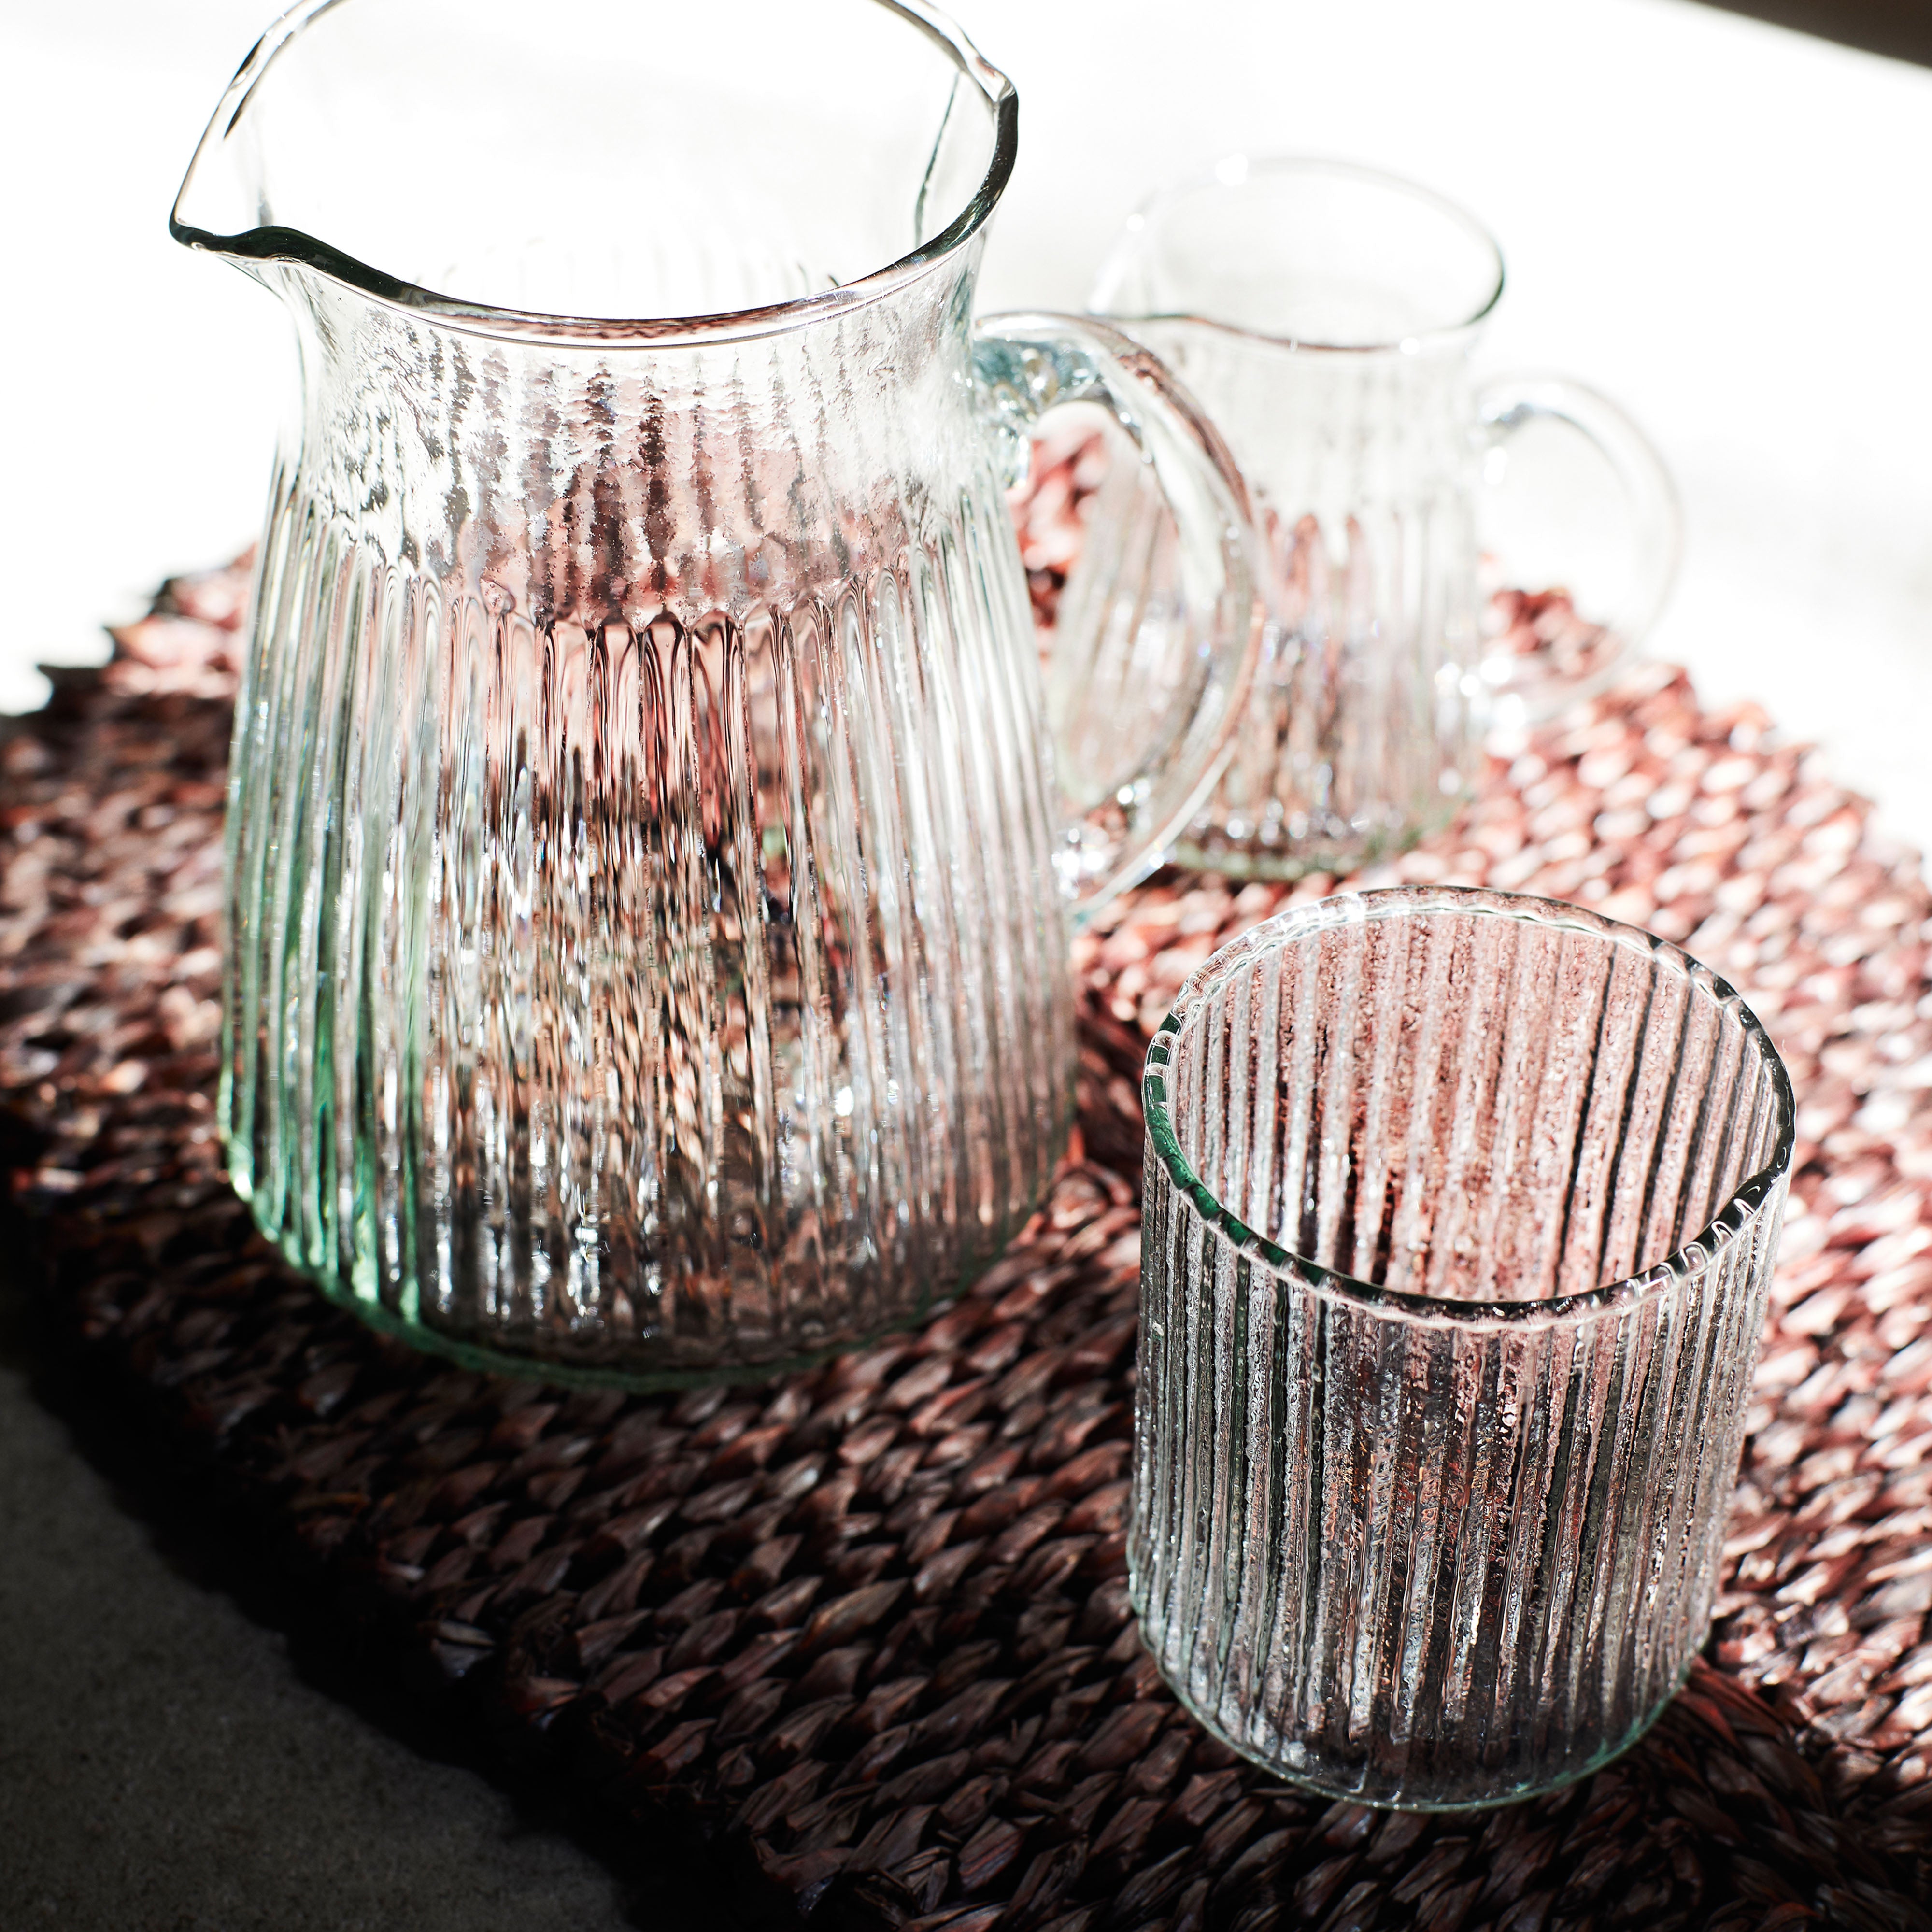 GROOVED GLASS TUMBLER